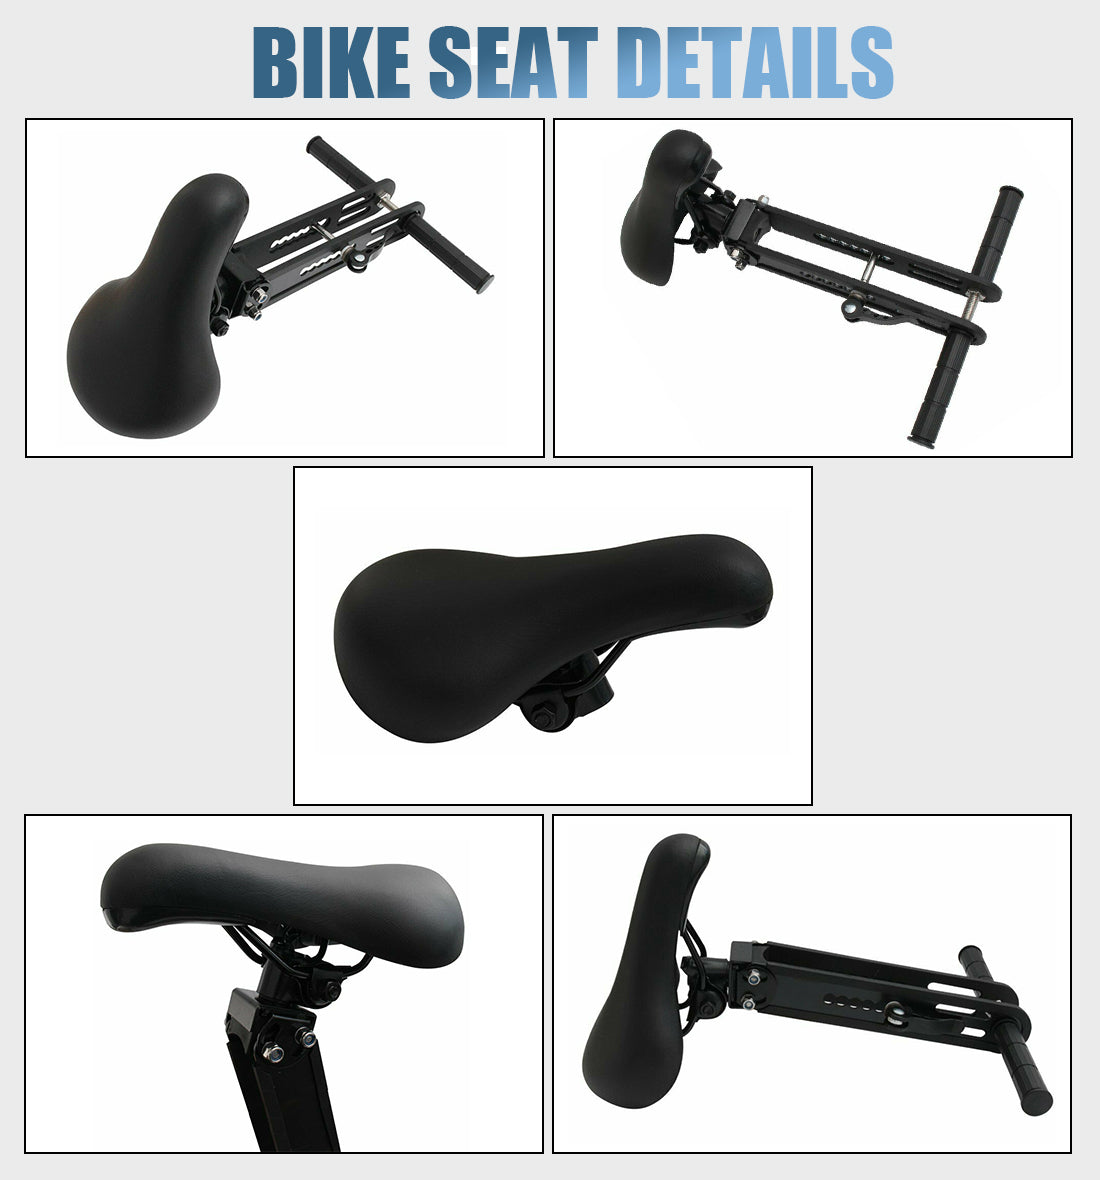 Kids Bike Seat and Handlebar Accessory Combo Pack - Complete Set | Front Mounted Bicycle Seats for Children 2-5 Years